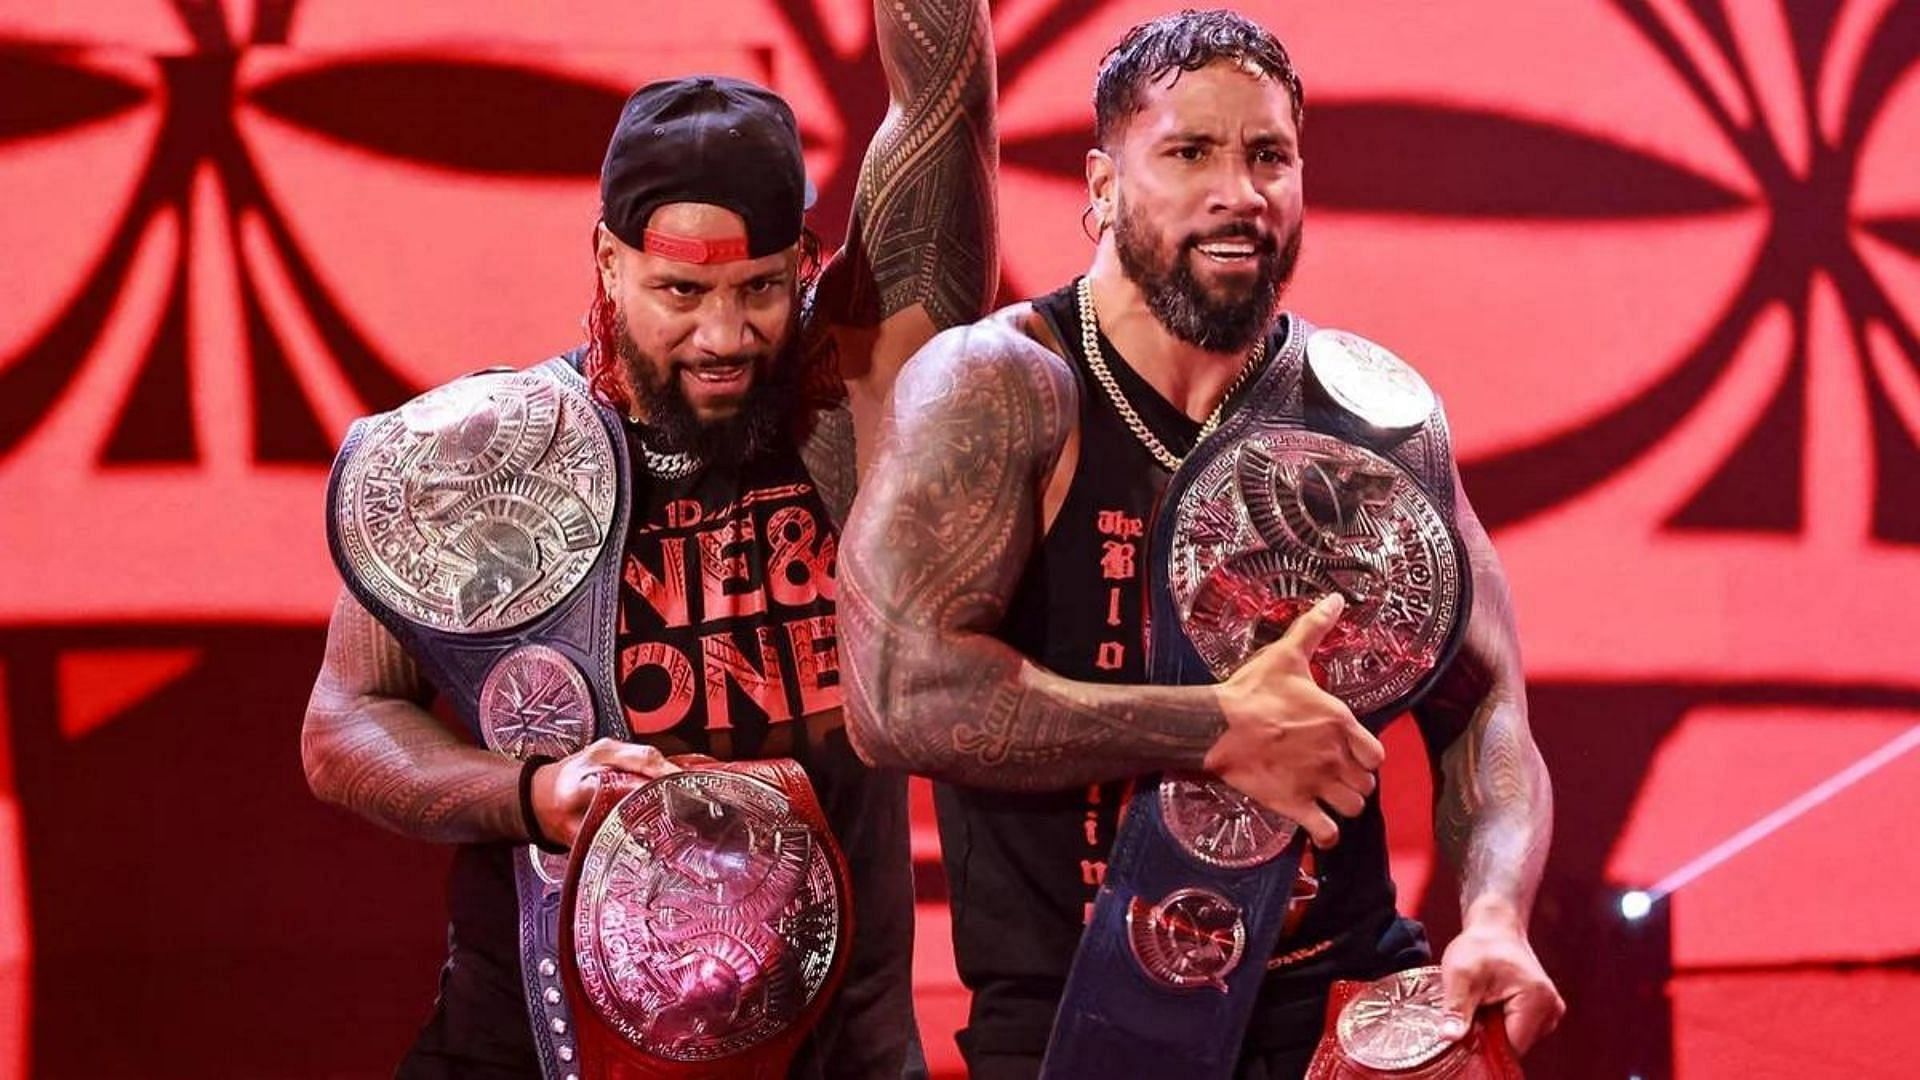 Jimmy and Jey have been the most entertaining tag team in the industry.